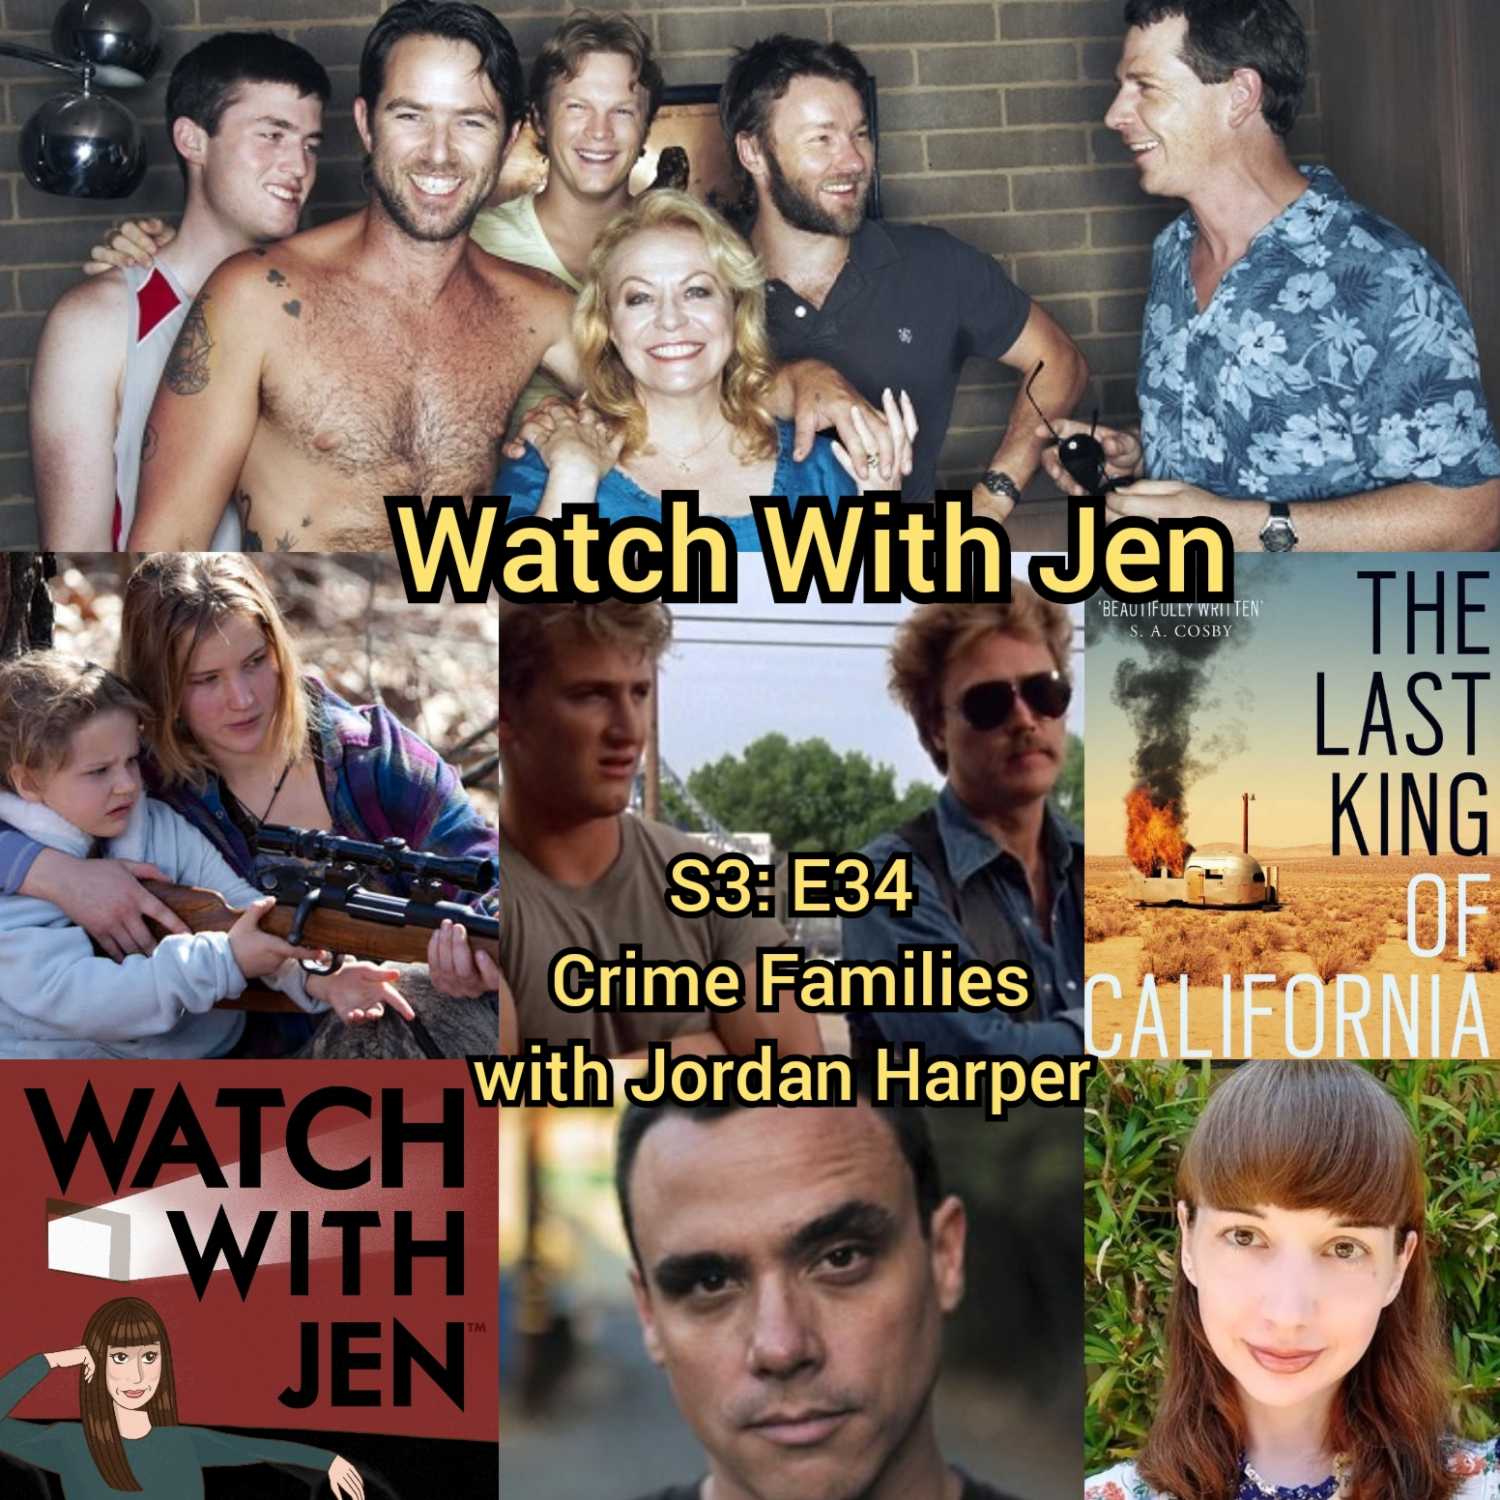 Watch With Jen - S3: E34 - Crime Families with Jordan Harper